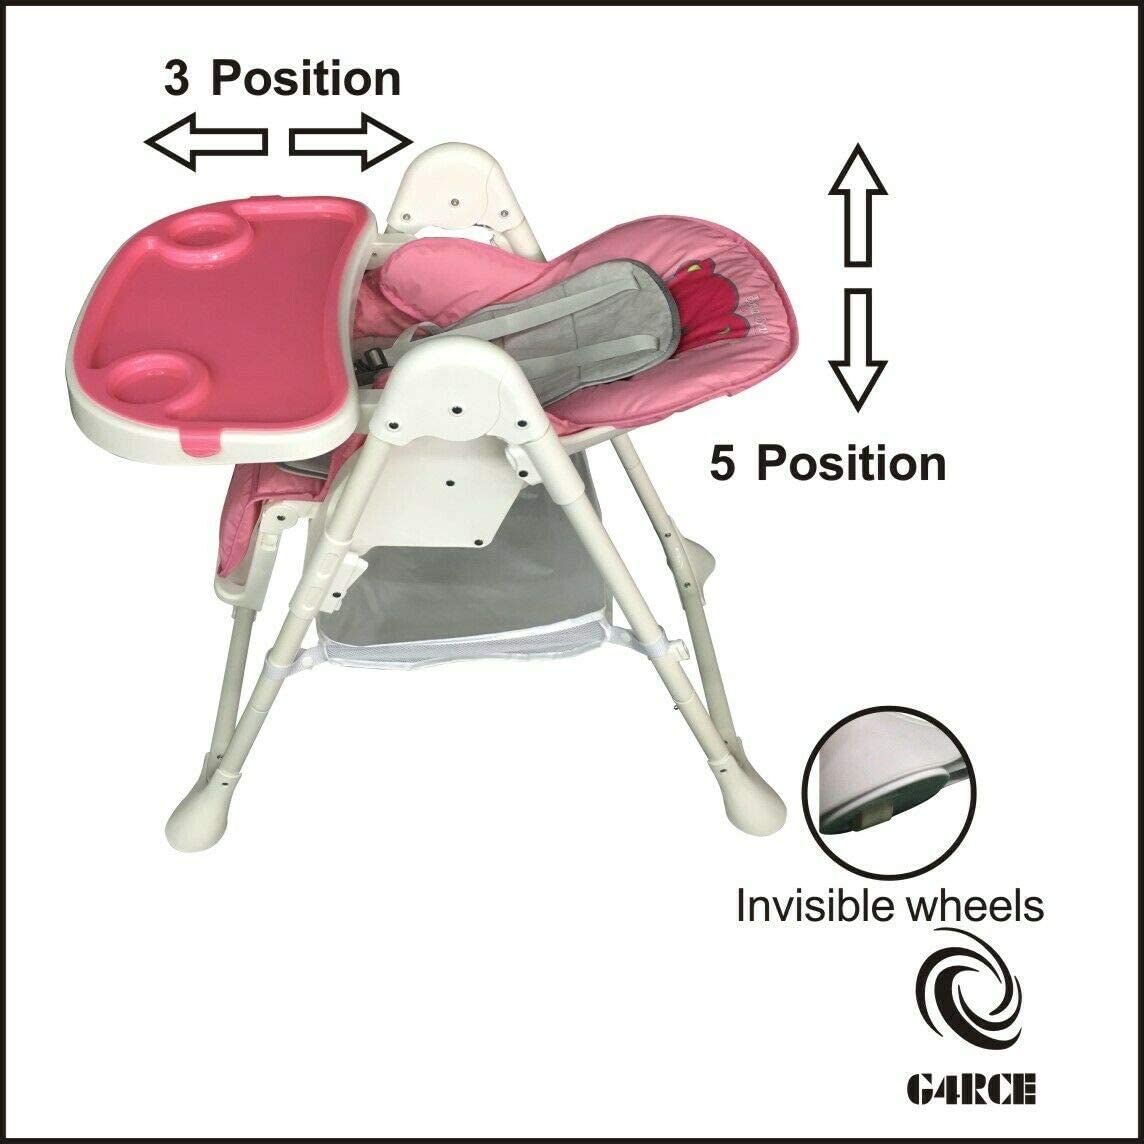 G4RCE Foldable 3 in 1 Baby Toddler Child Kids Infant Highchair Feeding Recliner Adjustable Seat Chair in Pink & Blue